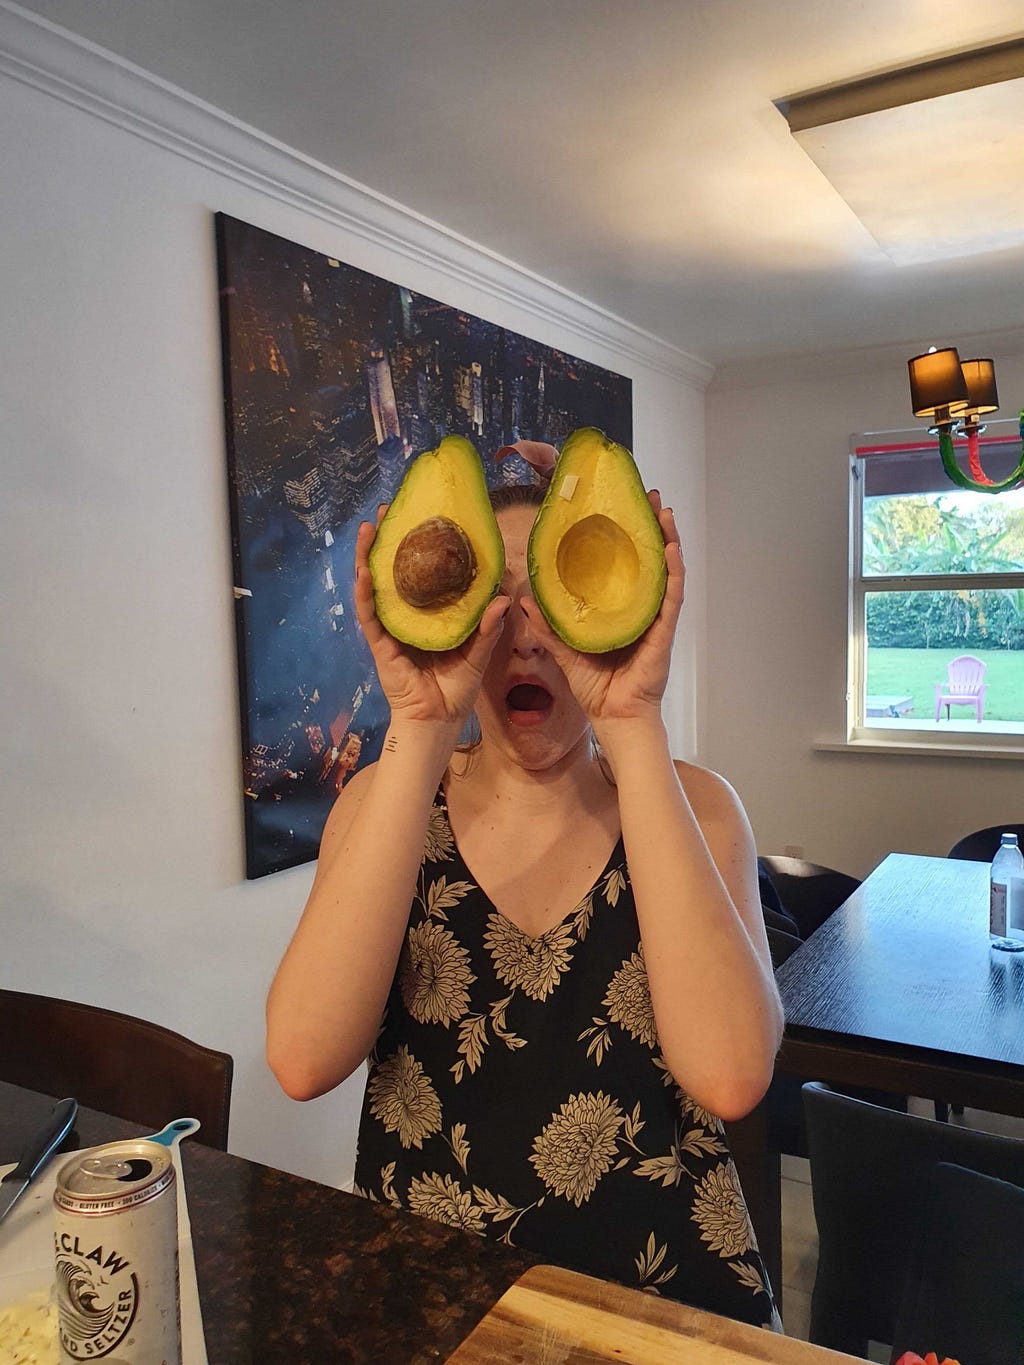 A woman holding up avocado halves in front of her eyes.